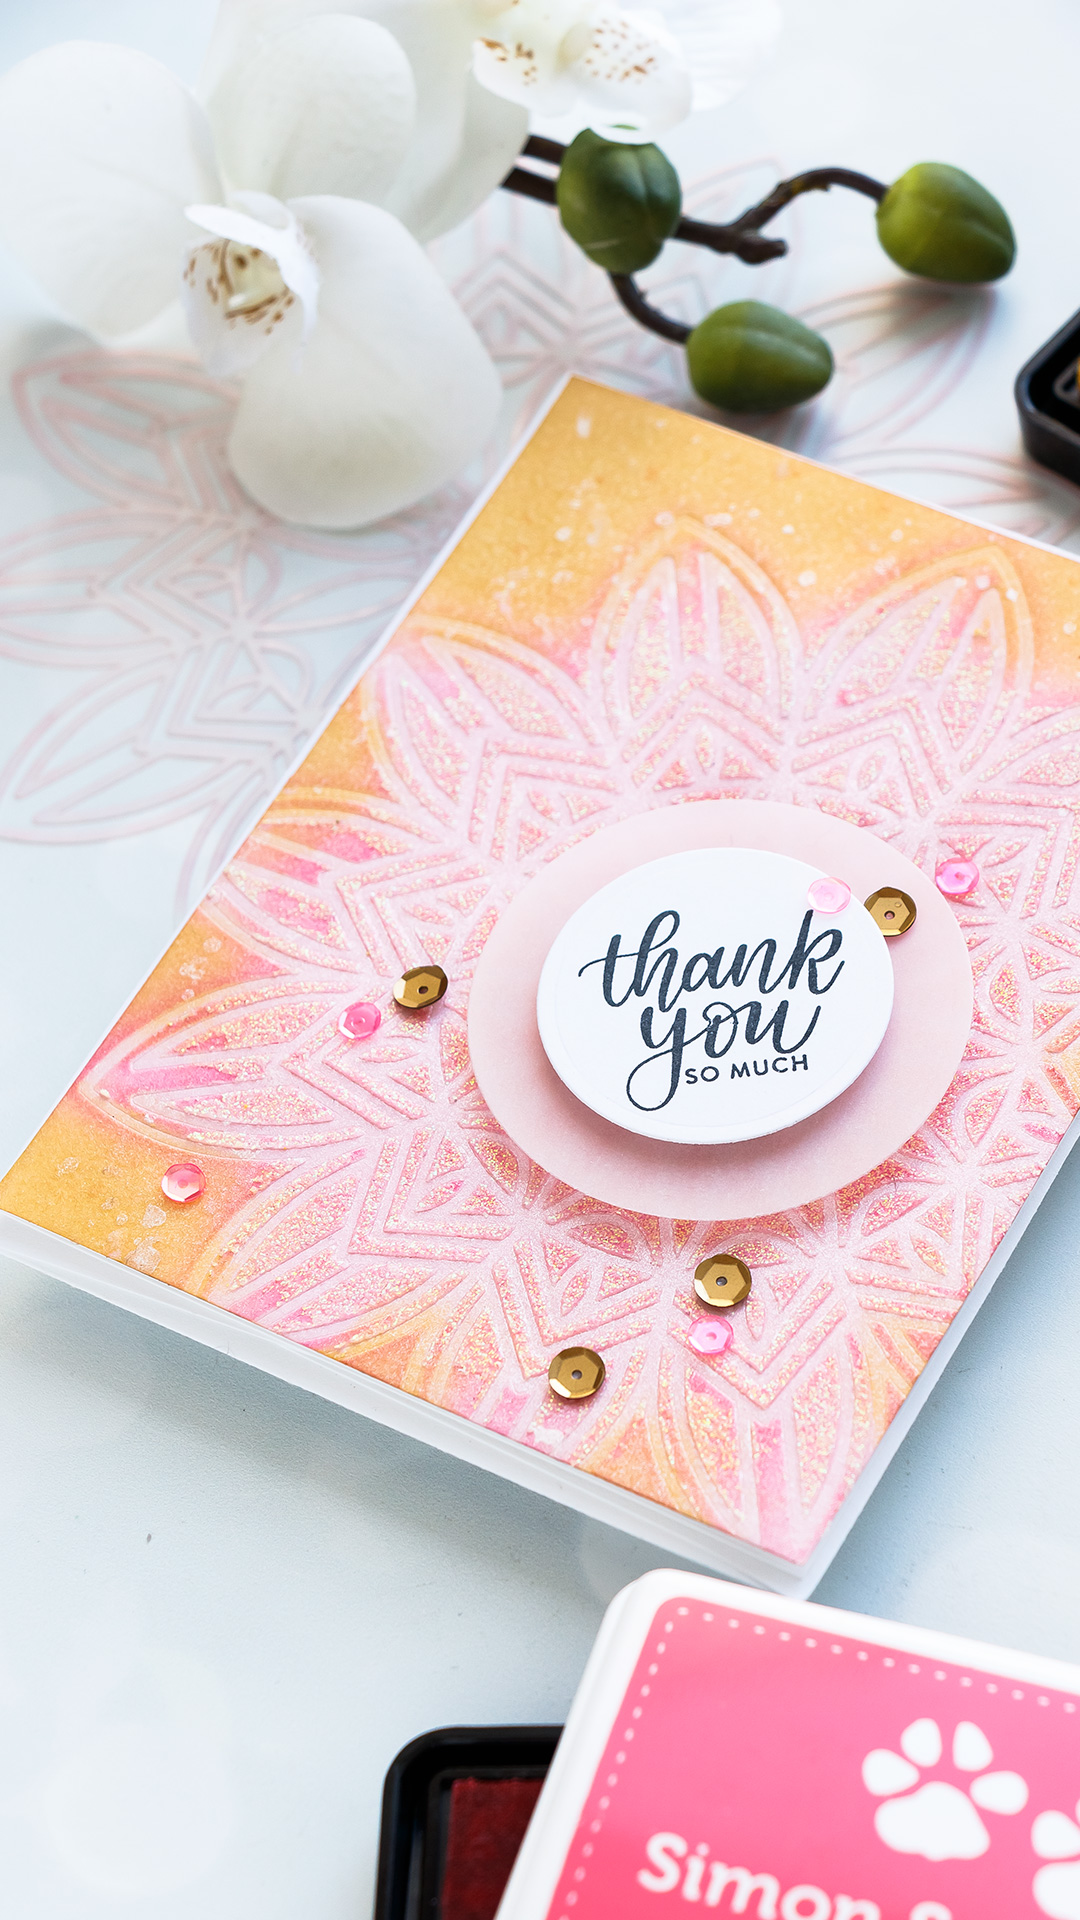 Simon Says Stamp | Stenciling, Ink Blending and More! Thank You So Much Card. Photo Tutorial by Yana Smakula #inkblending #simonsaysstamp #stenciling #cardmaking